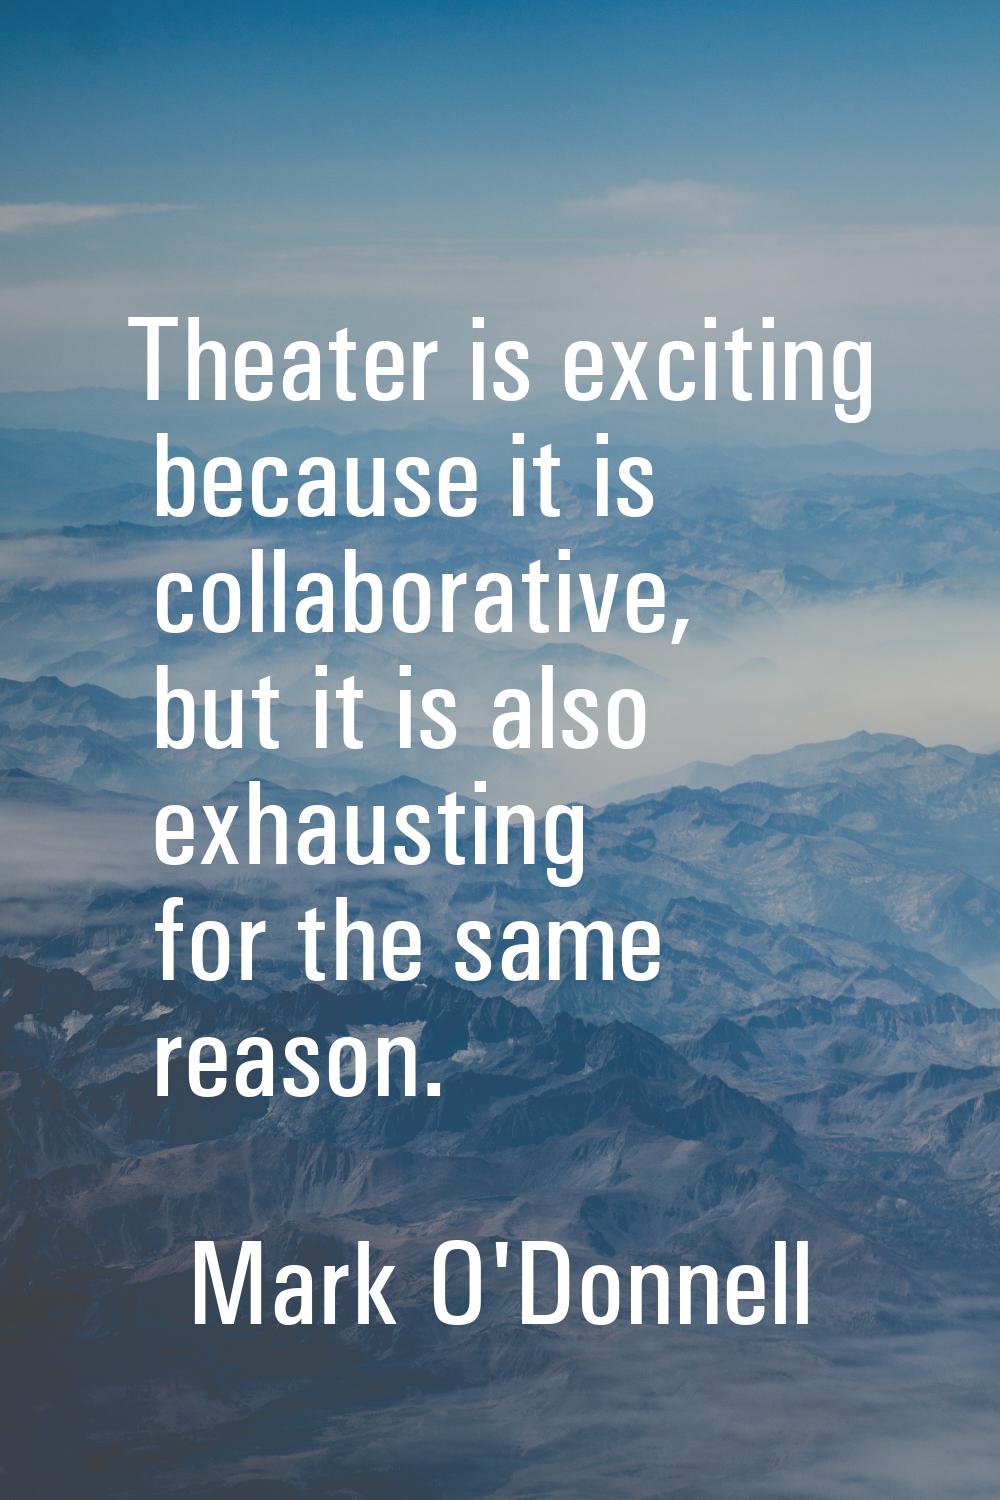 Theater is exciting because it is collaborative, but it is also exhausting for the same reason.